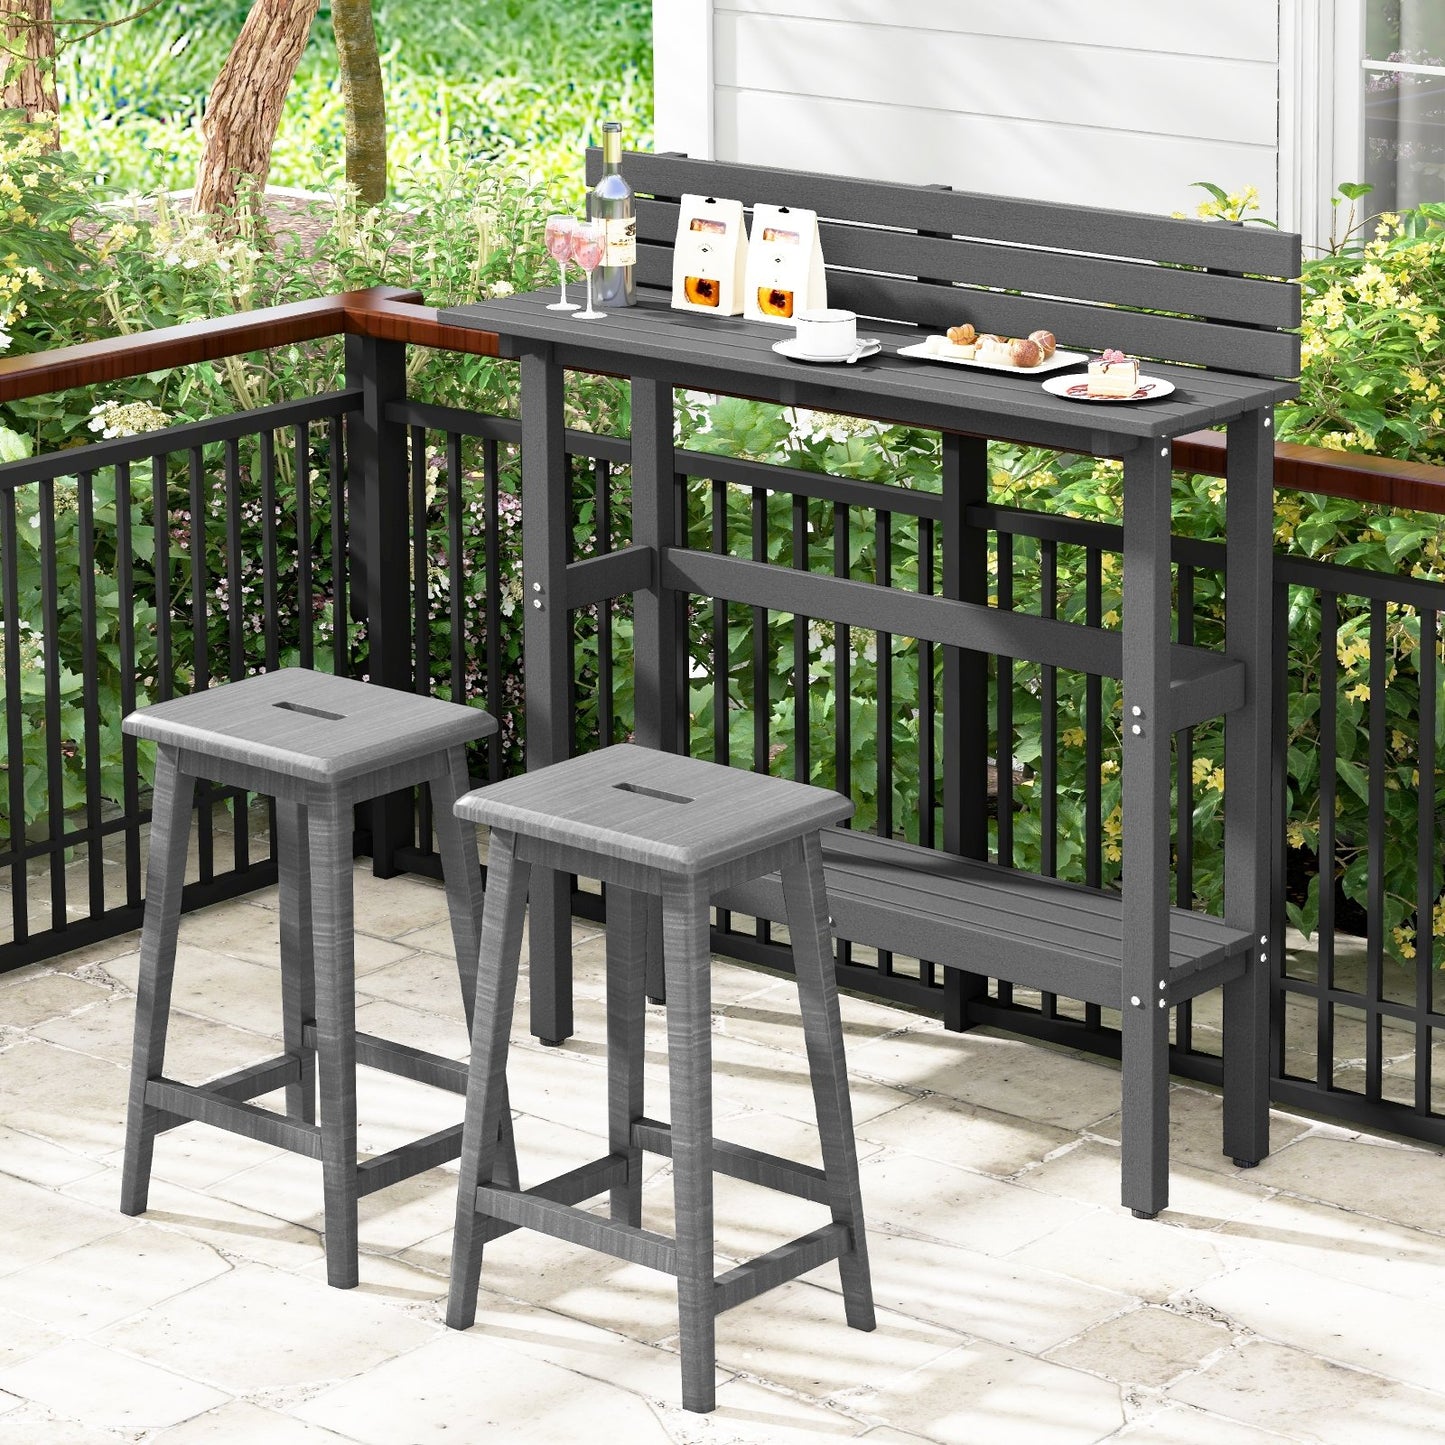 48" Patio Pub Height Table with Storage Shelf and Adjustable Foot Pads, Gray